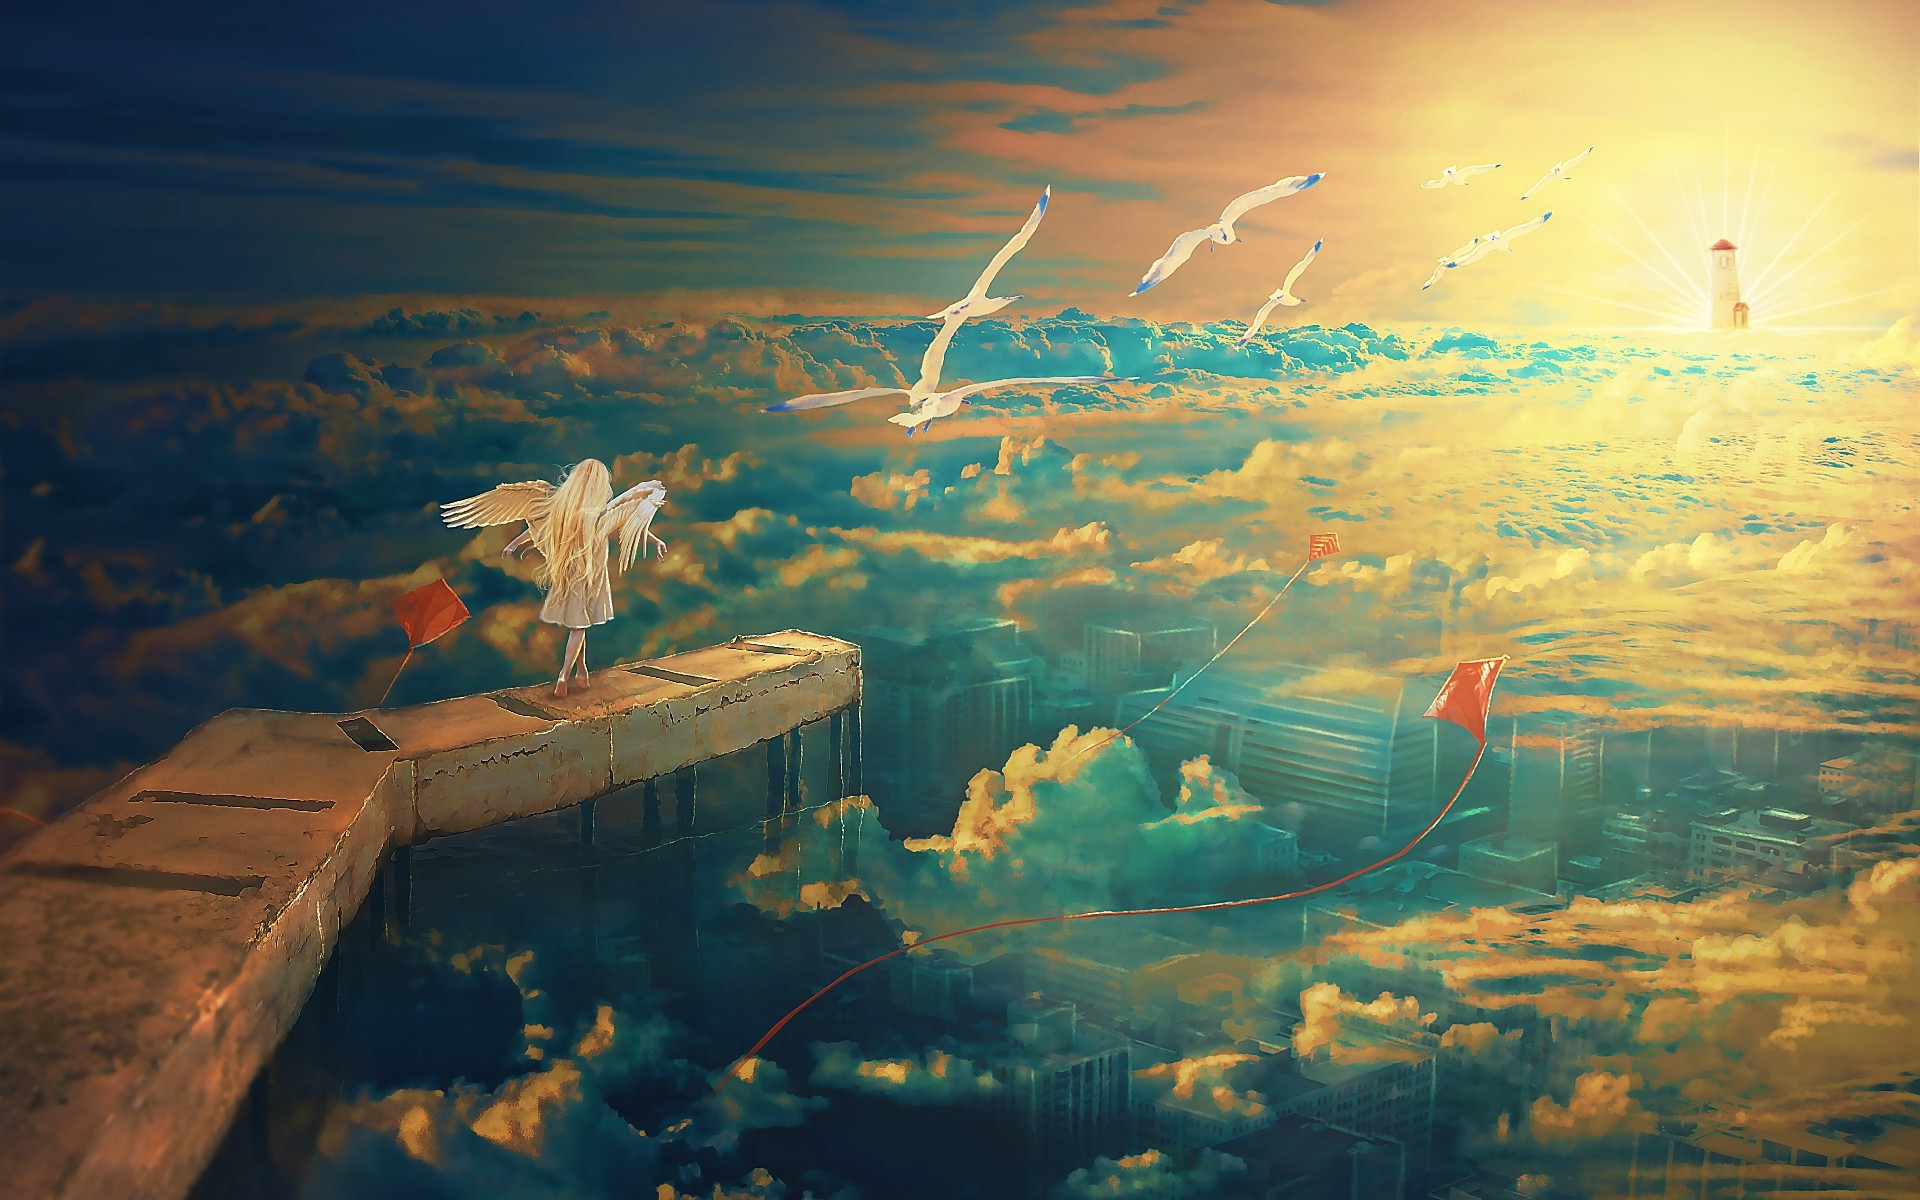 anime, Fantasy Art, Seagulls, Kites, Wings, Clouds, City